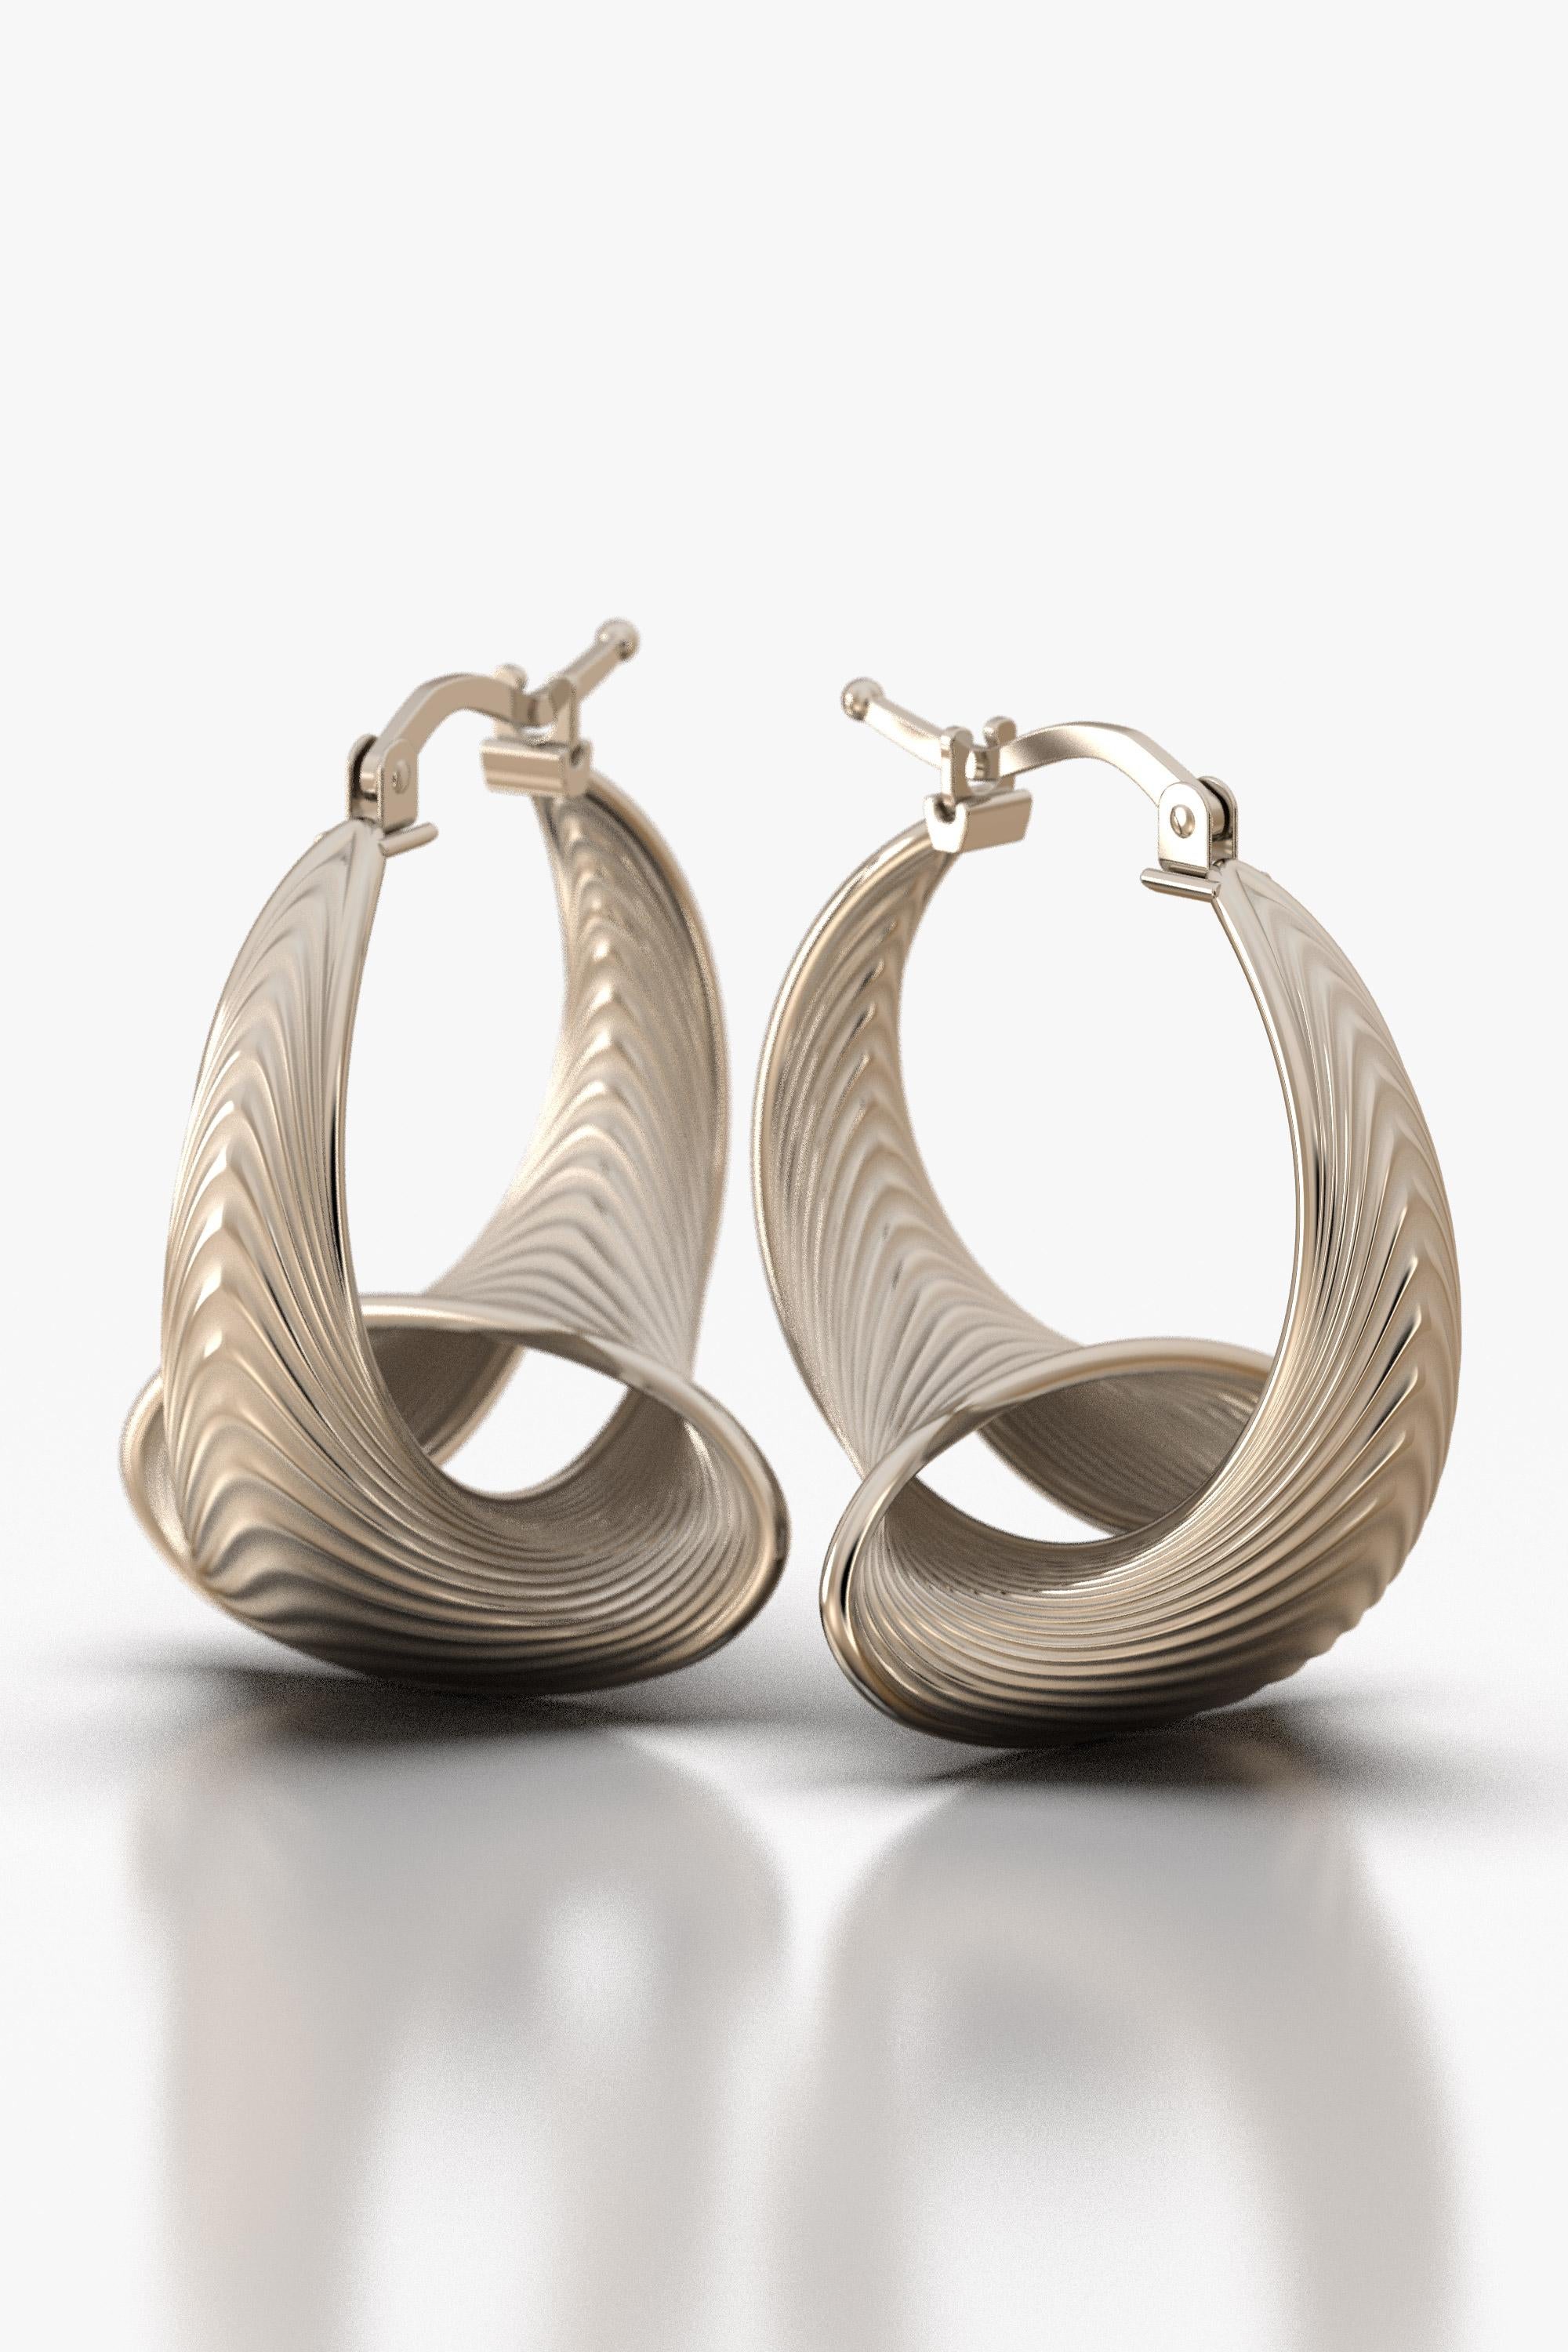 Stunning Hoop Earrings Only Made to Order 14k Gold, Made in Italy by Oltremare  For Sale 3